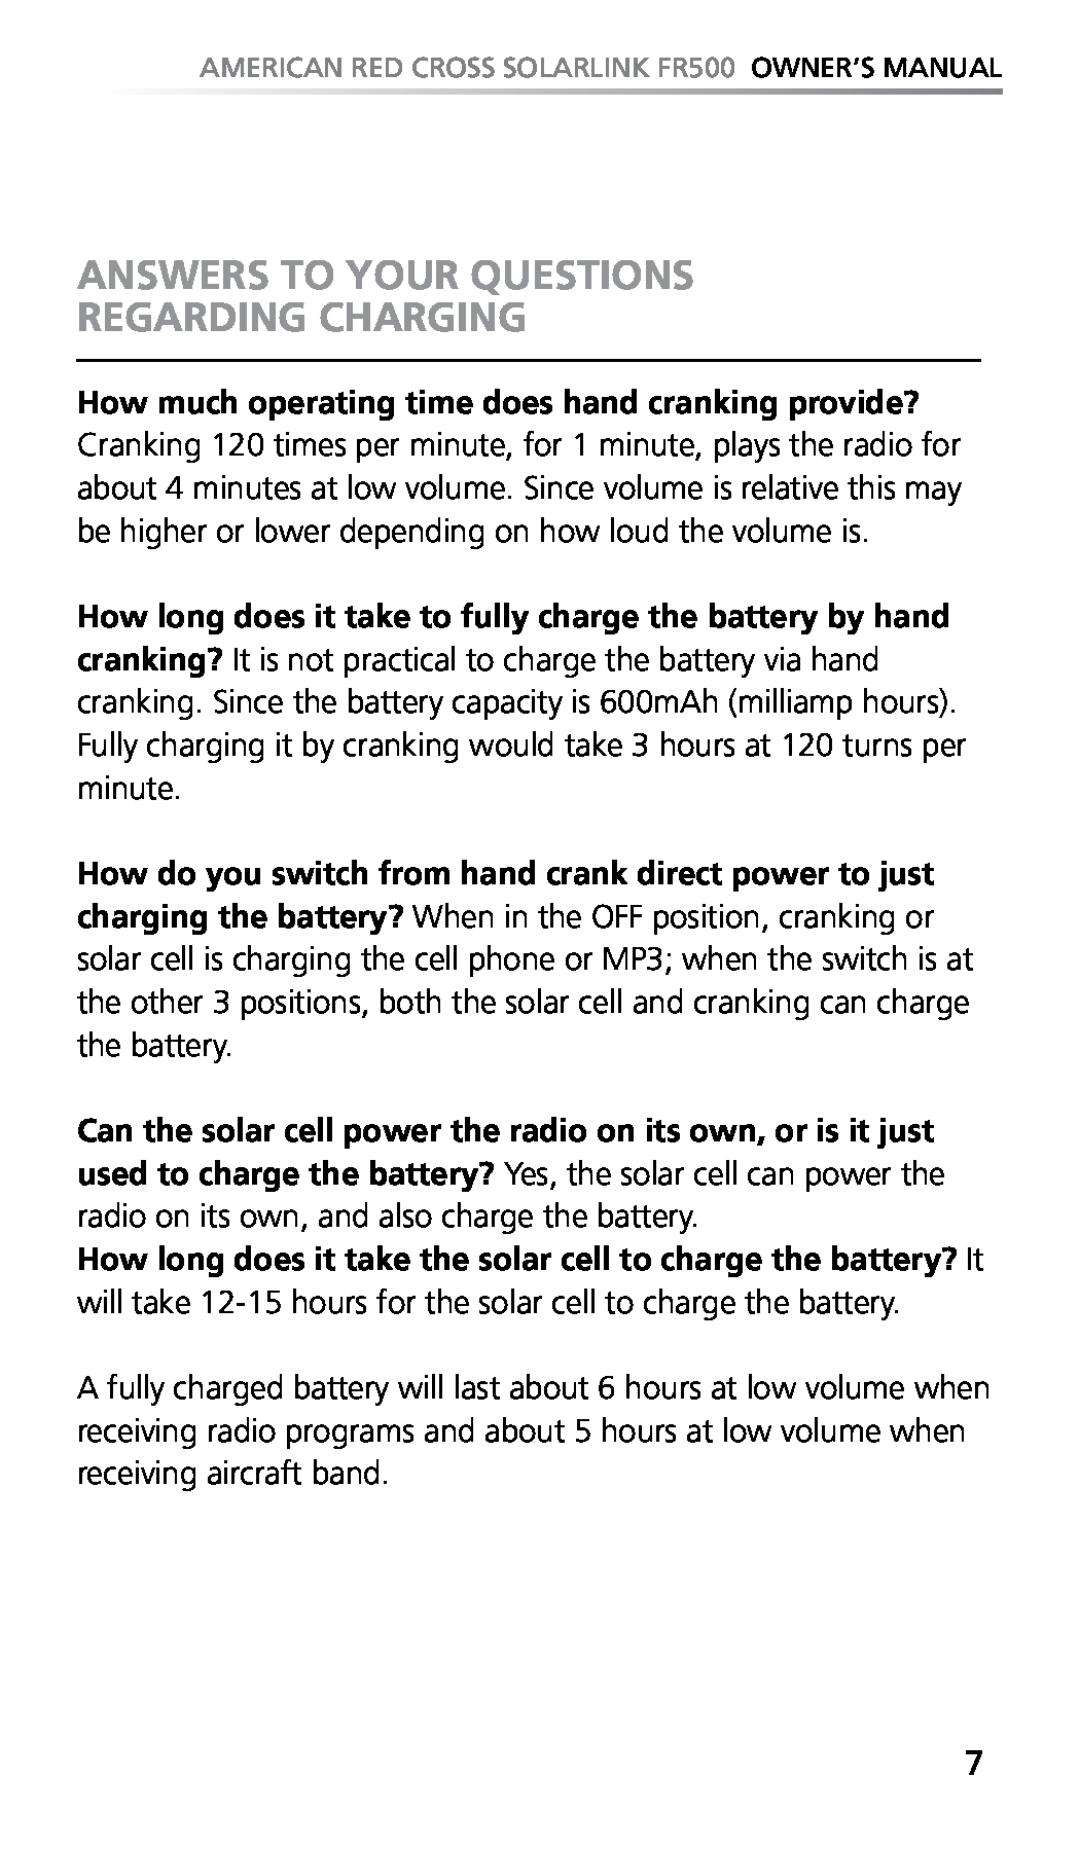 Eton FR500 owner manual Answers To Your Questions Regarding Charging 